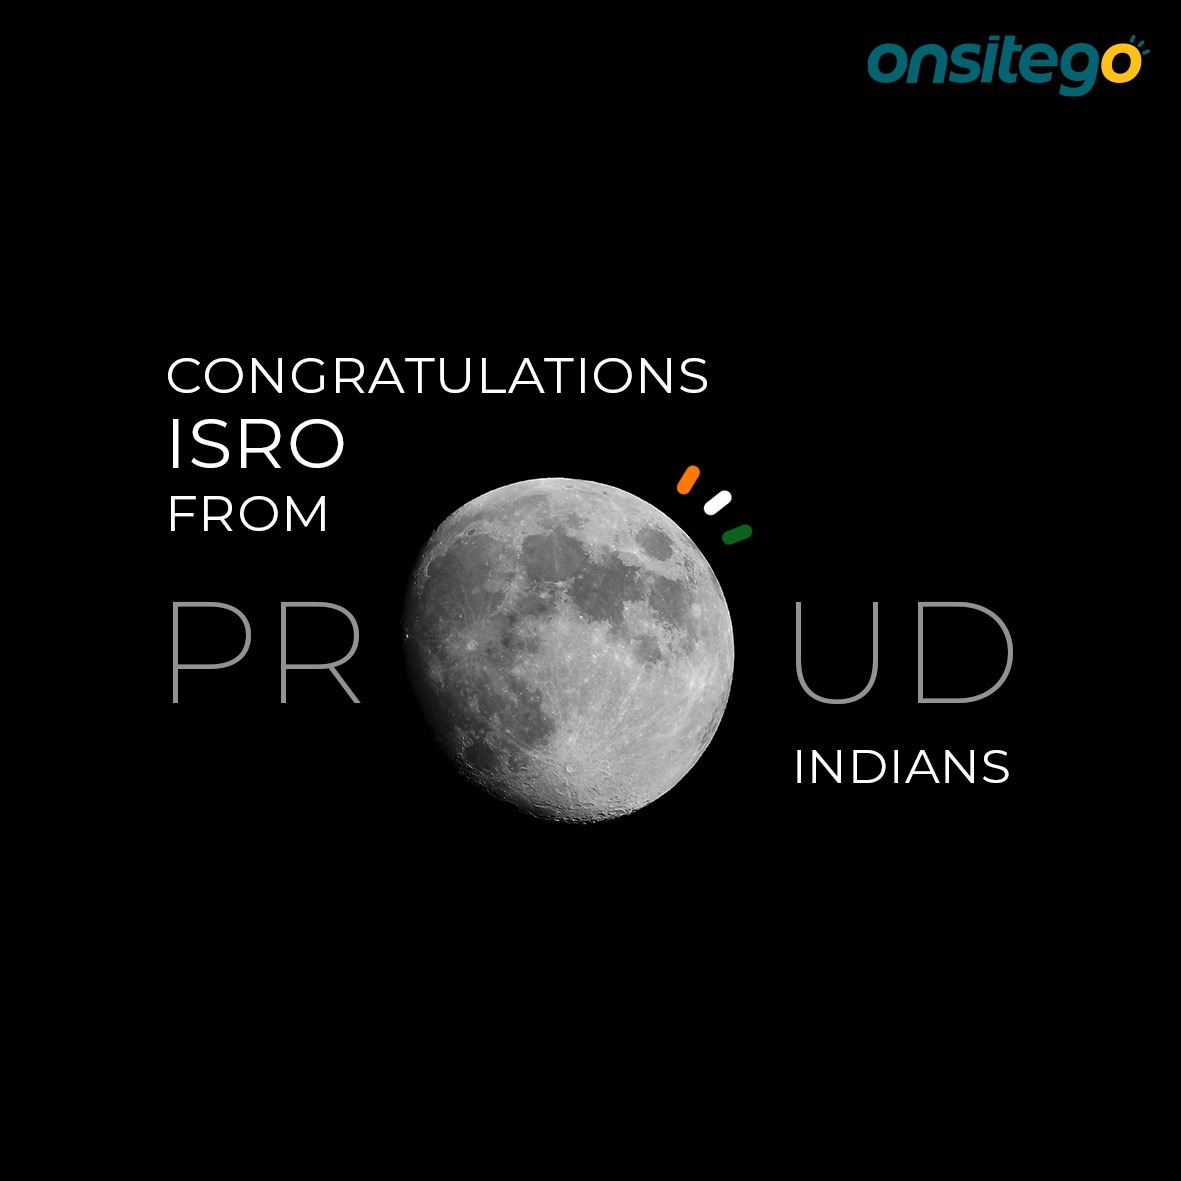 India's tricolor🇮🇳 waves proudly on the Moon! 🚀 Chandrayaan-3's successful landing is a remarkable achievement for our nation. Congratulations @isro, for this historic feat! 🇮🇳🎉 #Chandrayaan3 #ProudMoment #ISRO